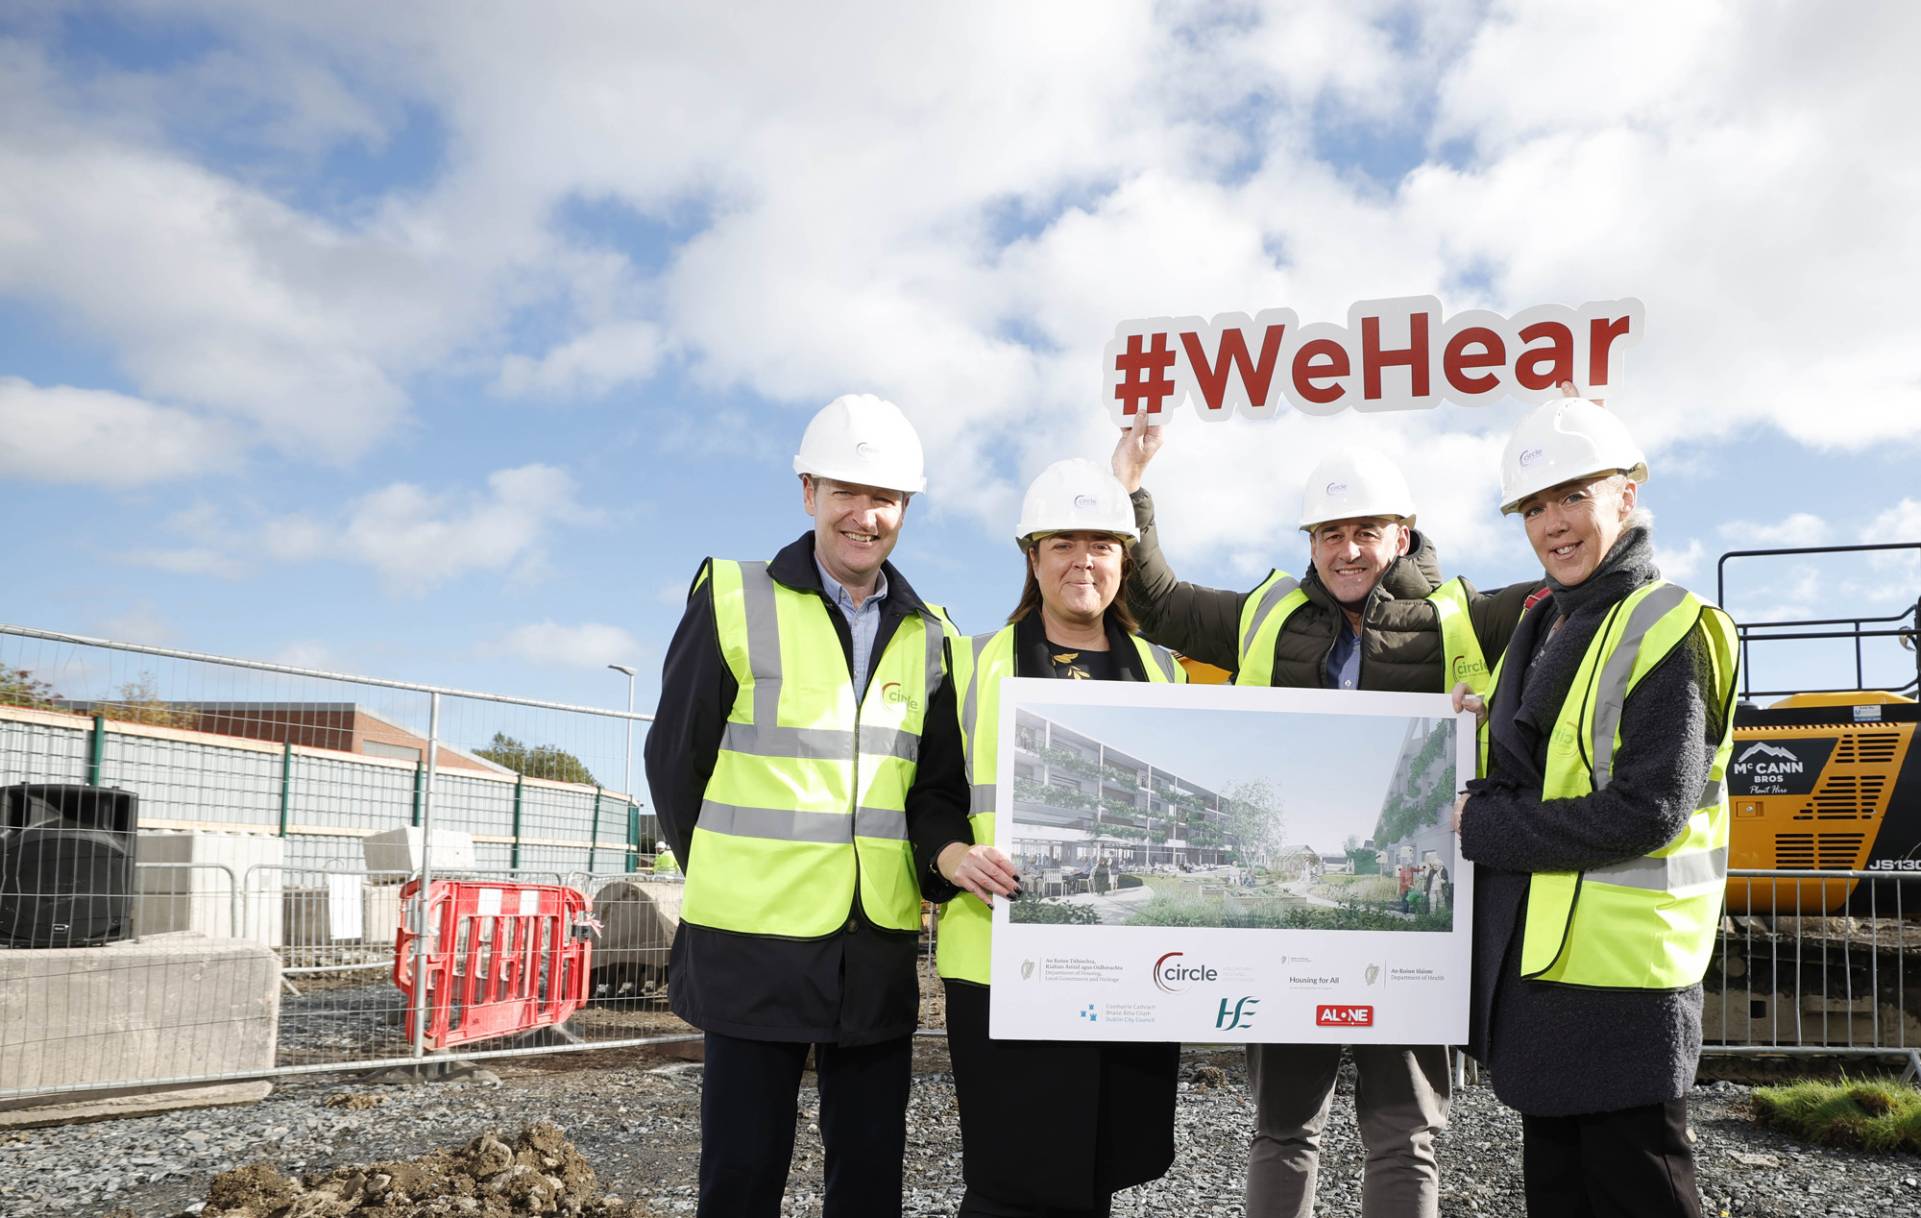 Circle's housing services team holding development drawings and #wehear poster on a building site.